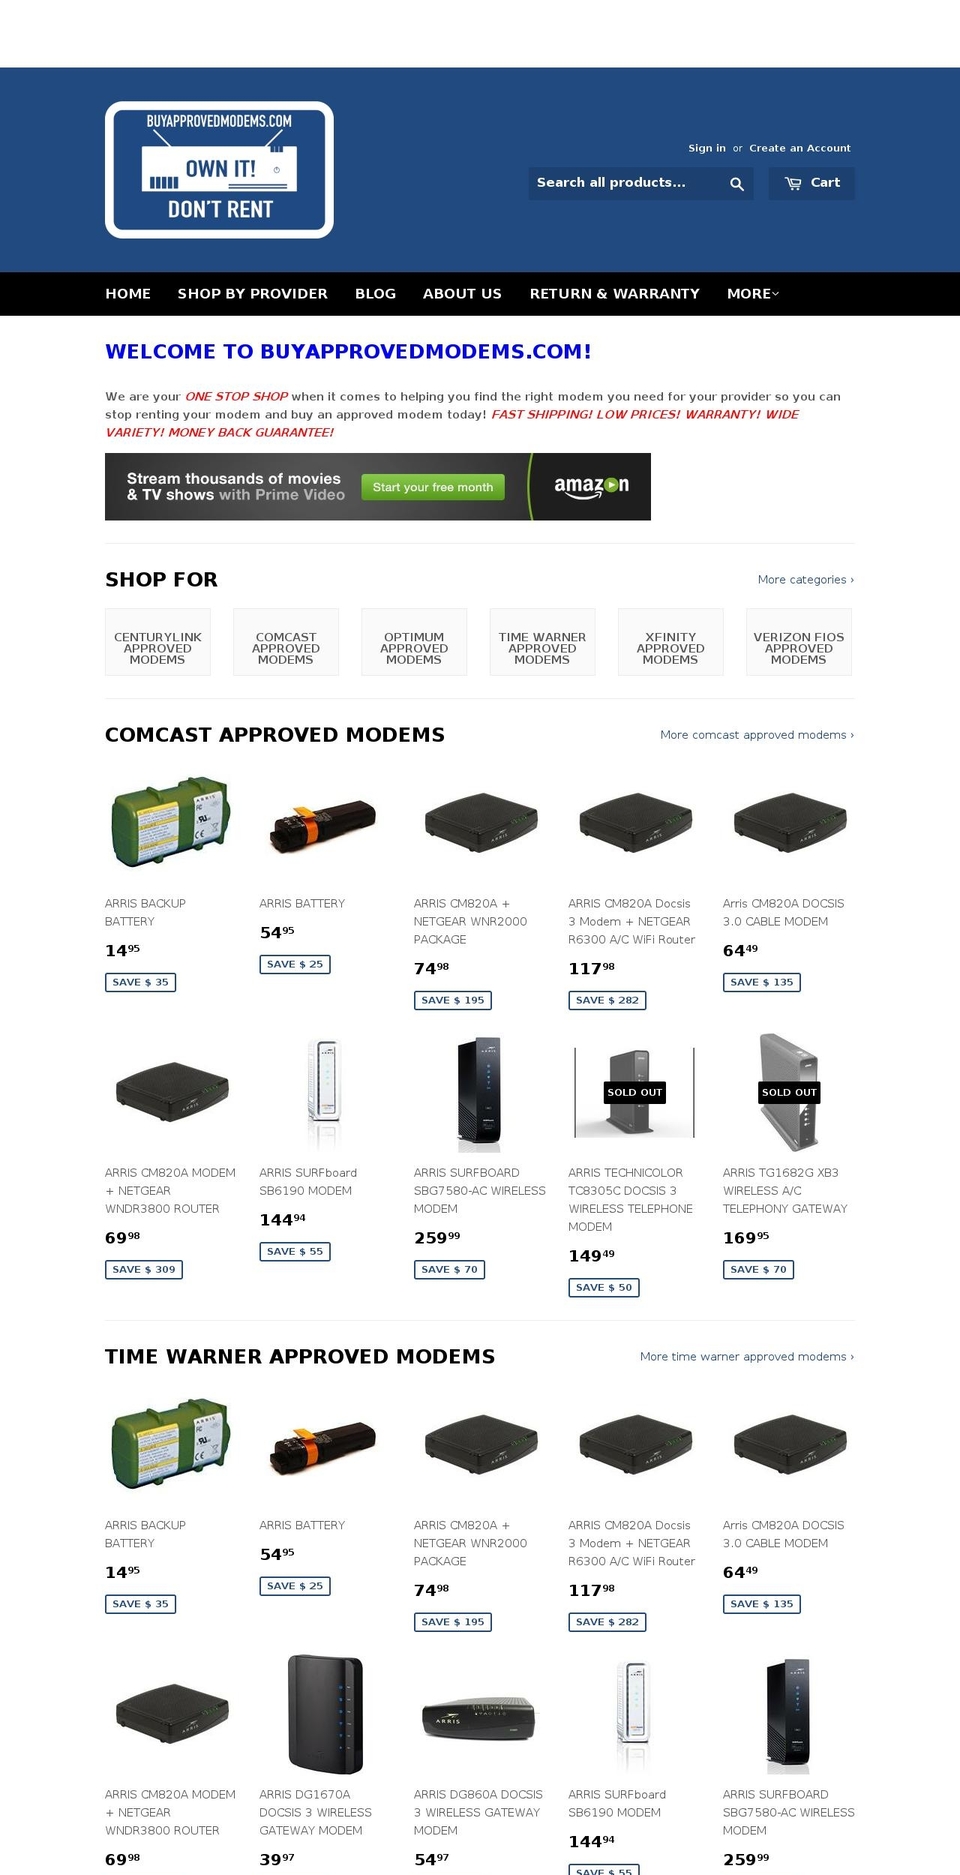 Mode Shopify theme site example buyapprovedmodems.com